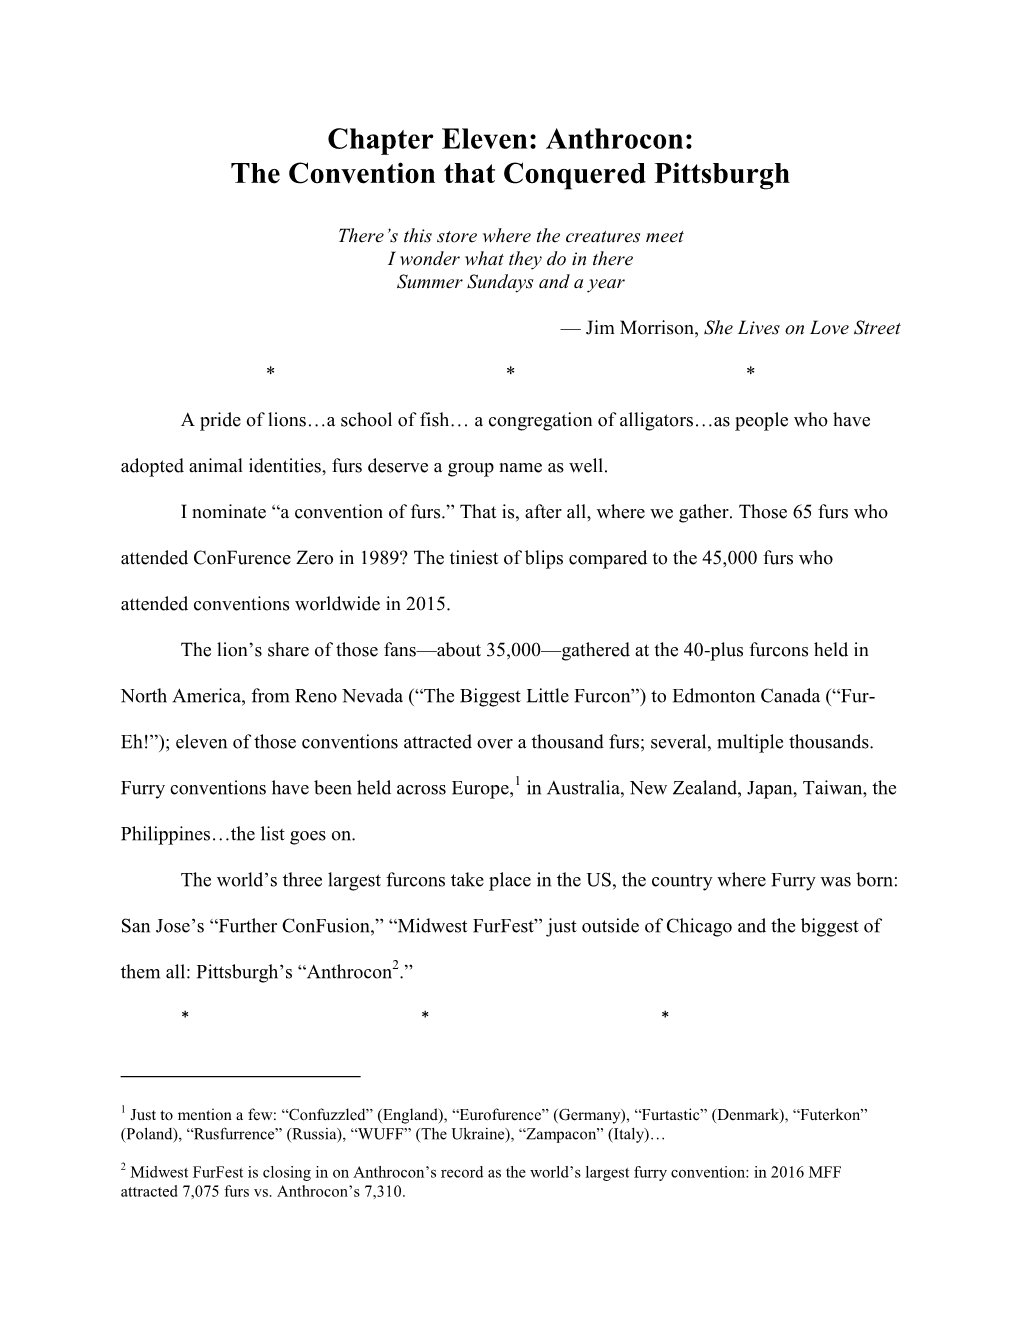 Chapter Eleven: Anthrocon: the Convention That Conquered Pittsburgh